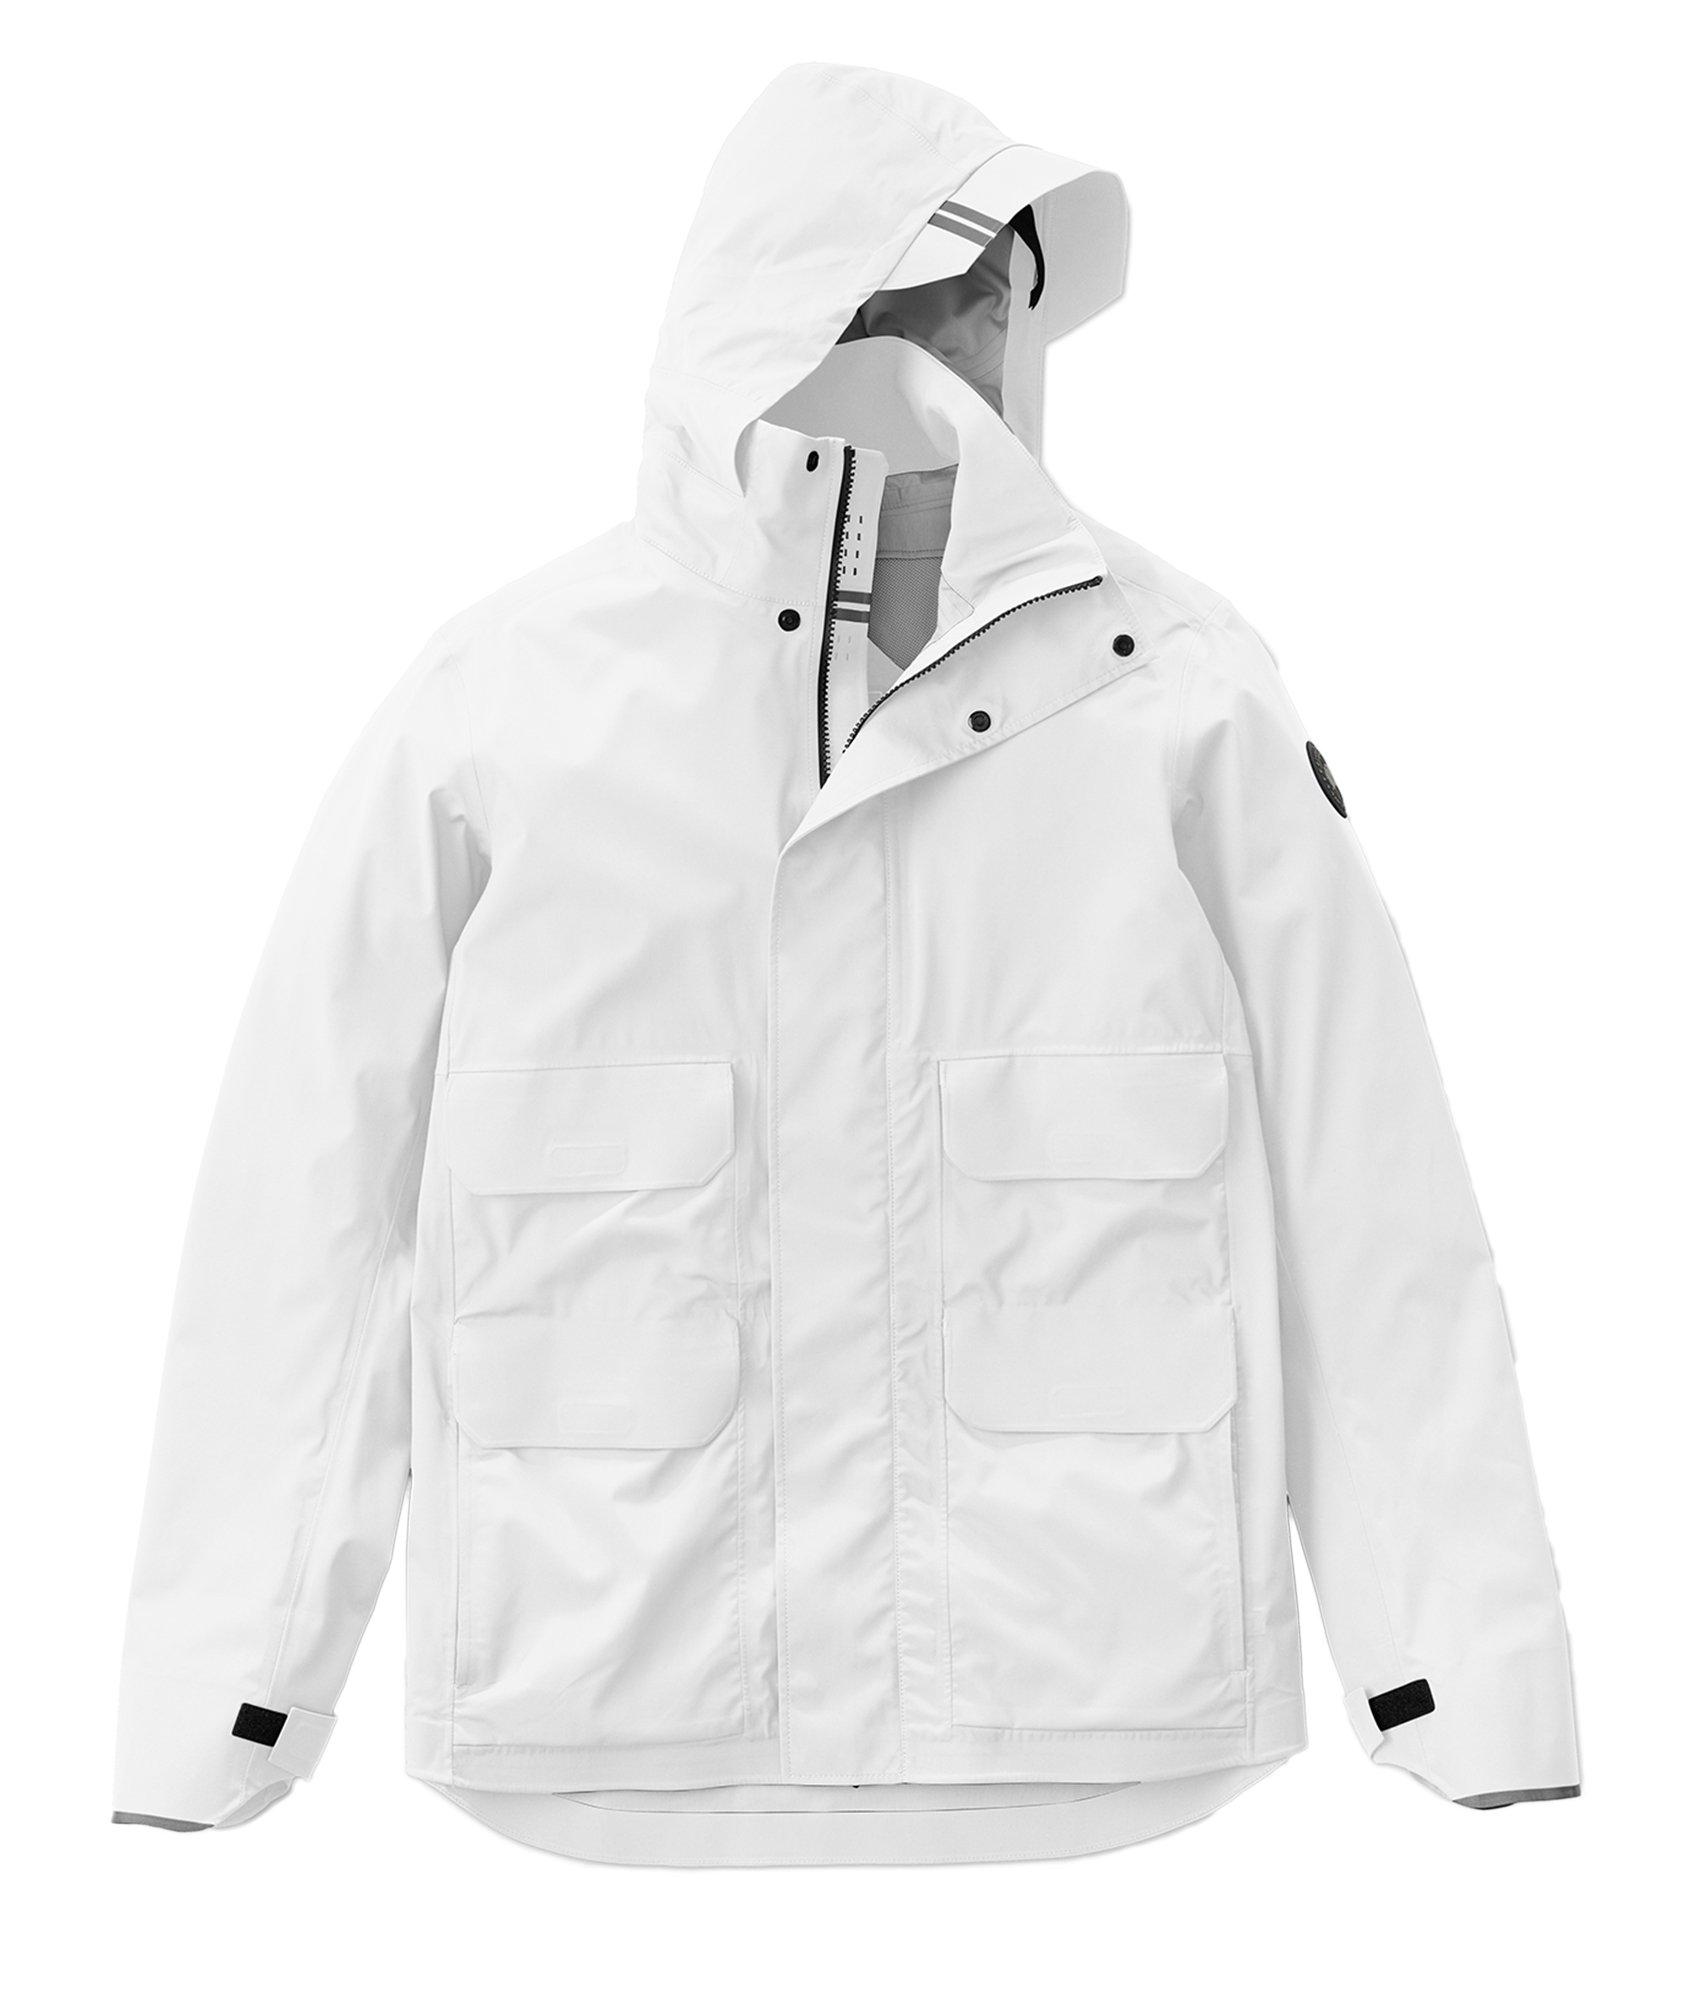 Meaford Water-Repellent Jacket image 0